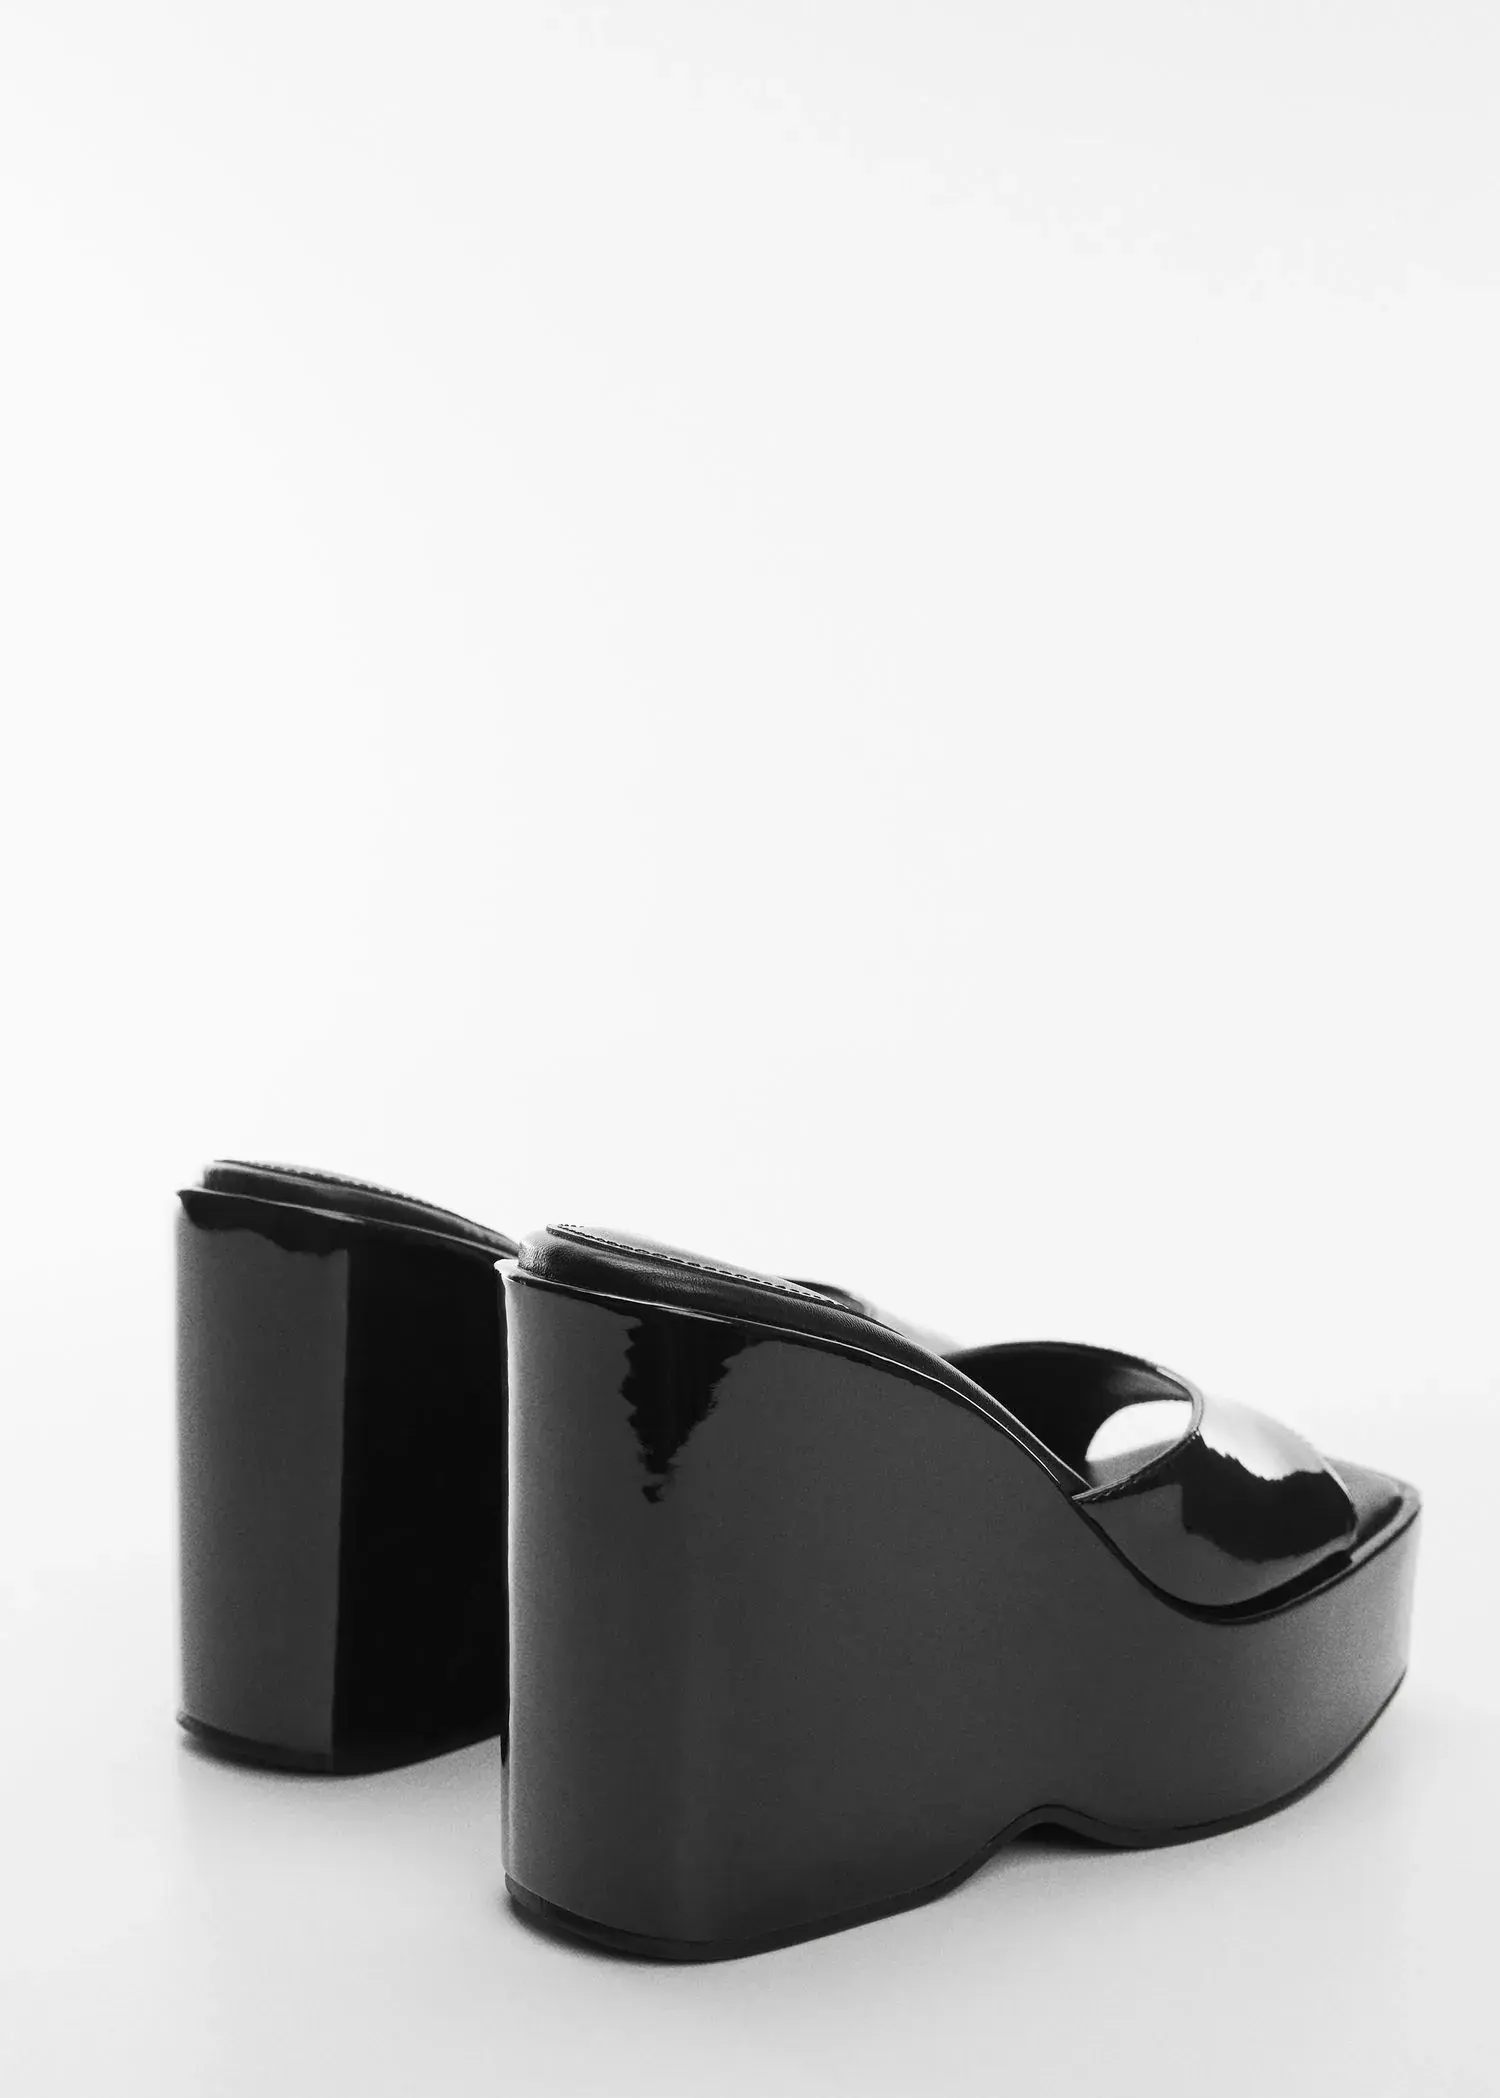 Mango Patent leather-effect platform sandals. a pair of black shoes on a white background 